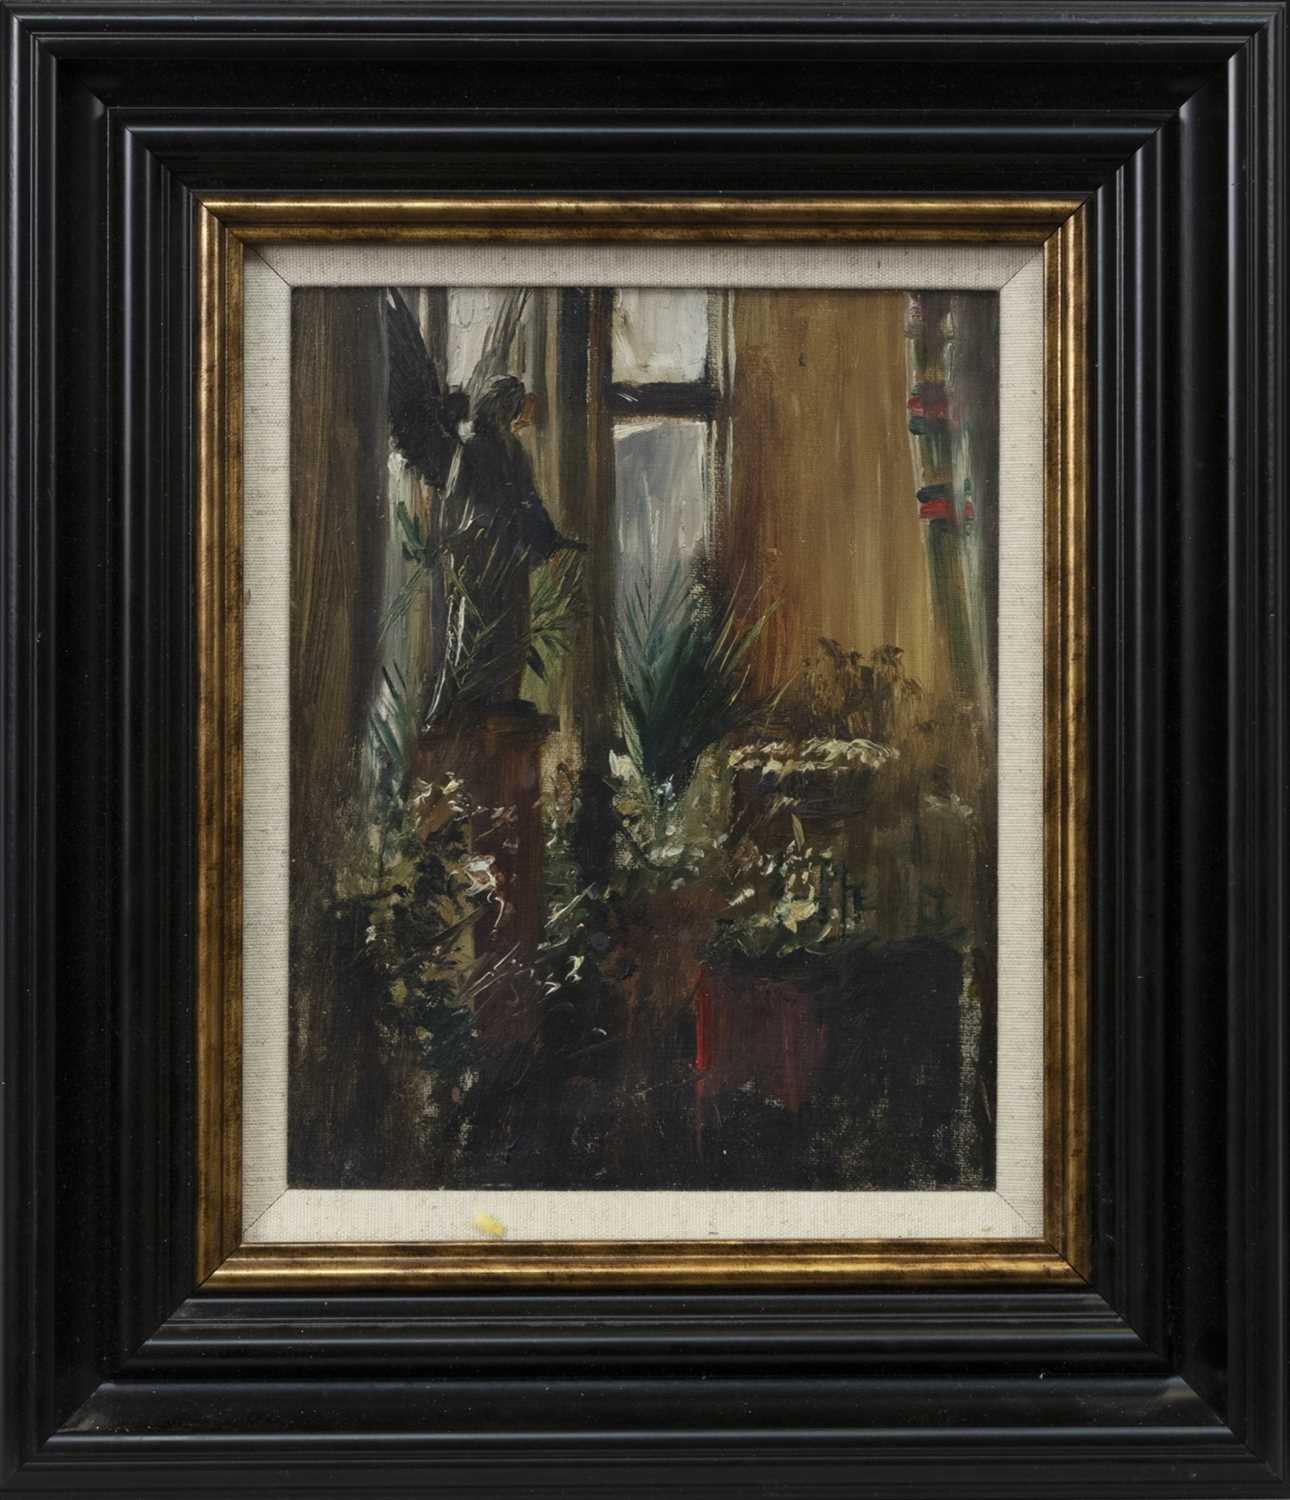 Lot 83 - GLASGOW INTERIOR WITH ANGEL SCULPTURE, A SCOTTISH OIL